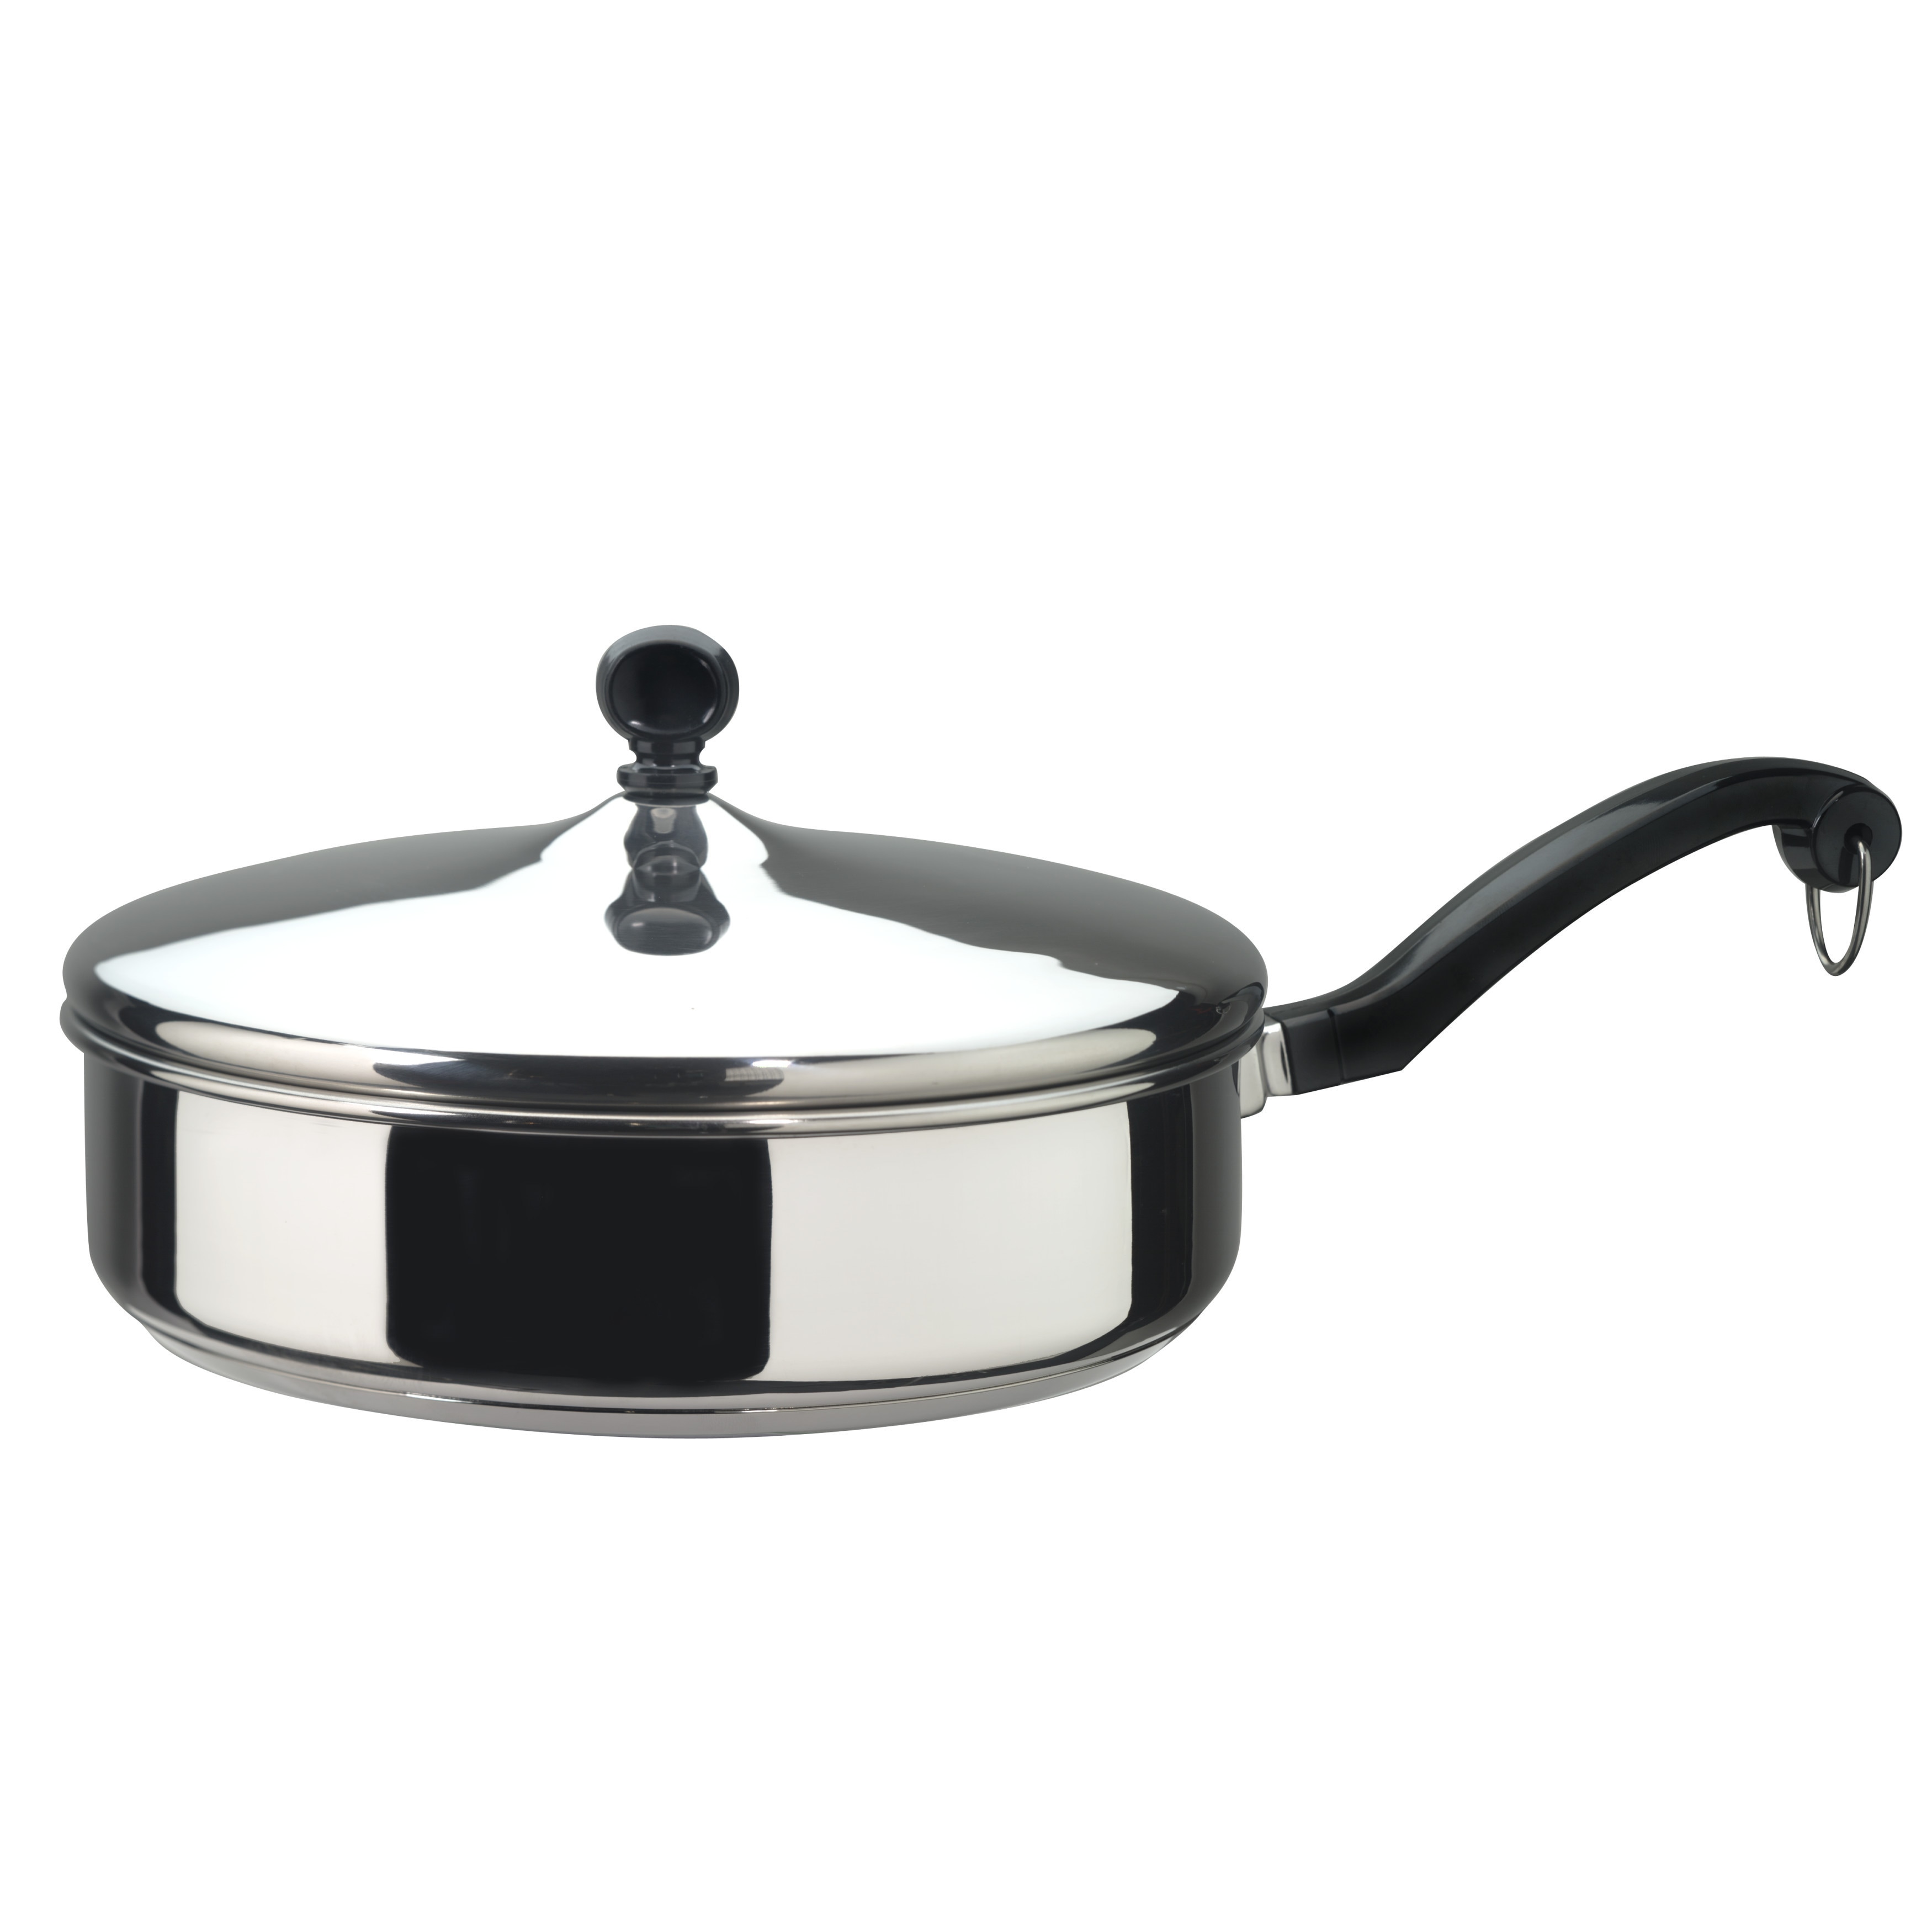 Farberware Classic Series Stainless Steel 2-3/4-Quart Covered Sautテδゥ Pan  by Farberware